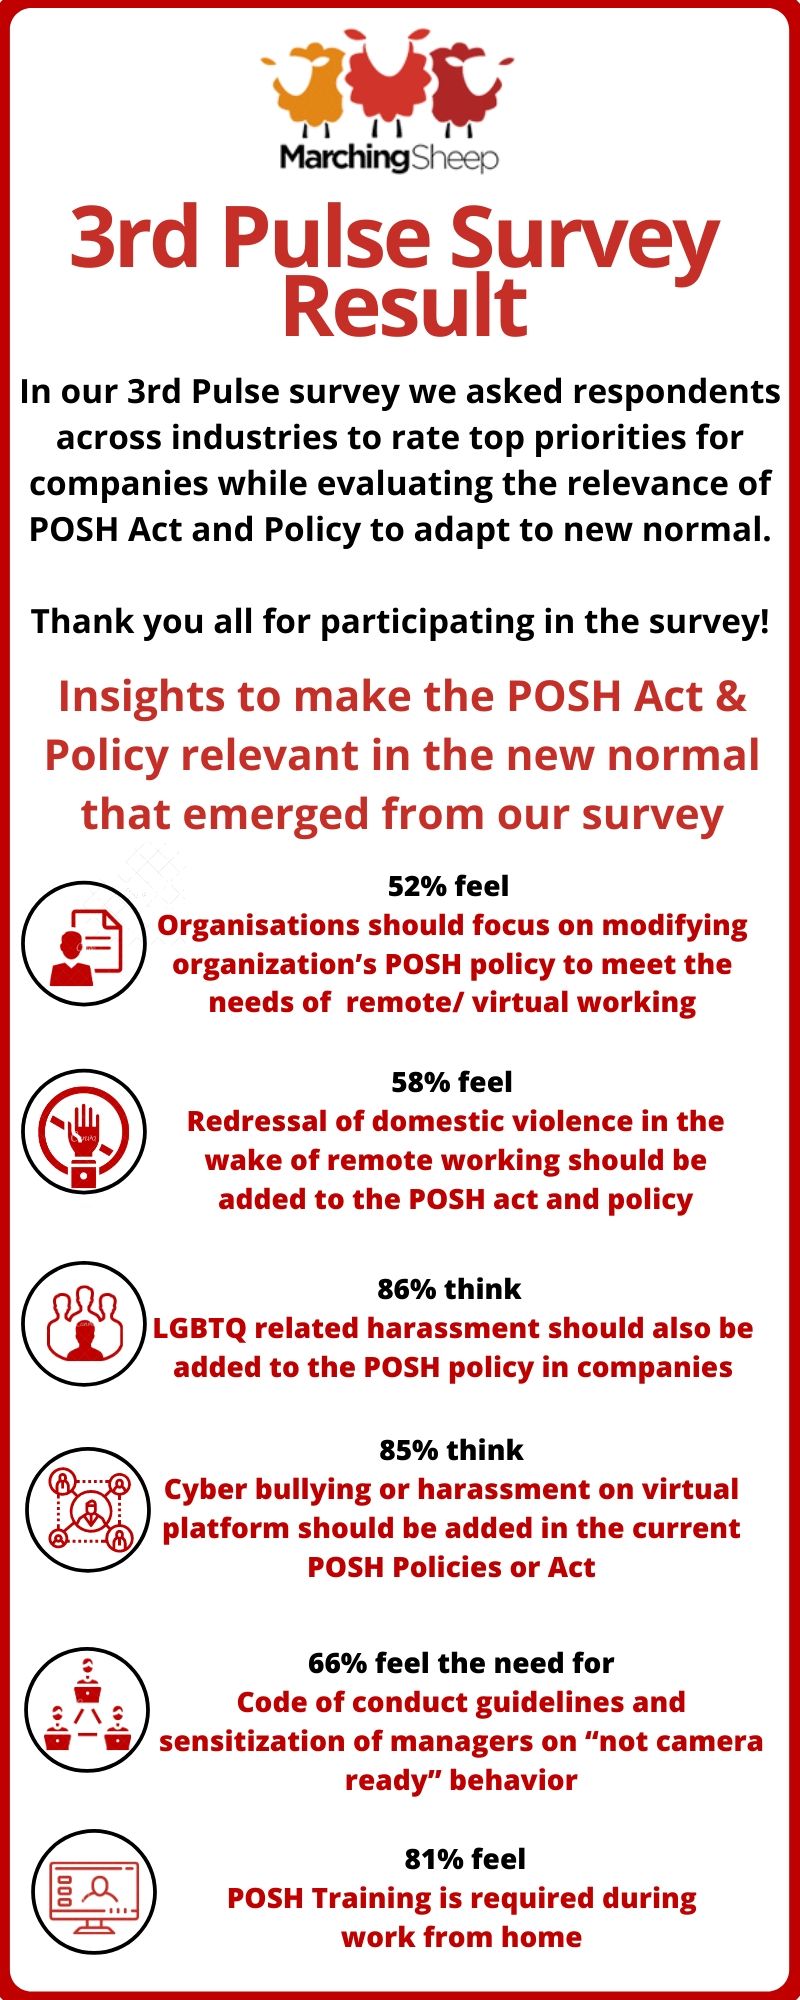 3rd Pulse Survey Results: On the relevance of POSH act and policy in new normal decoding=